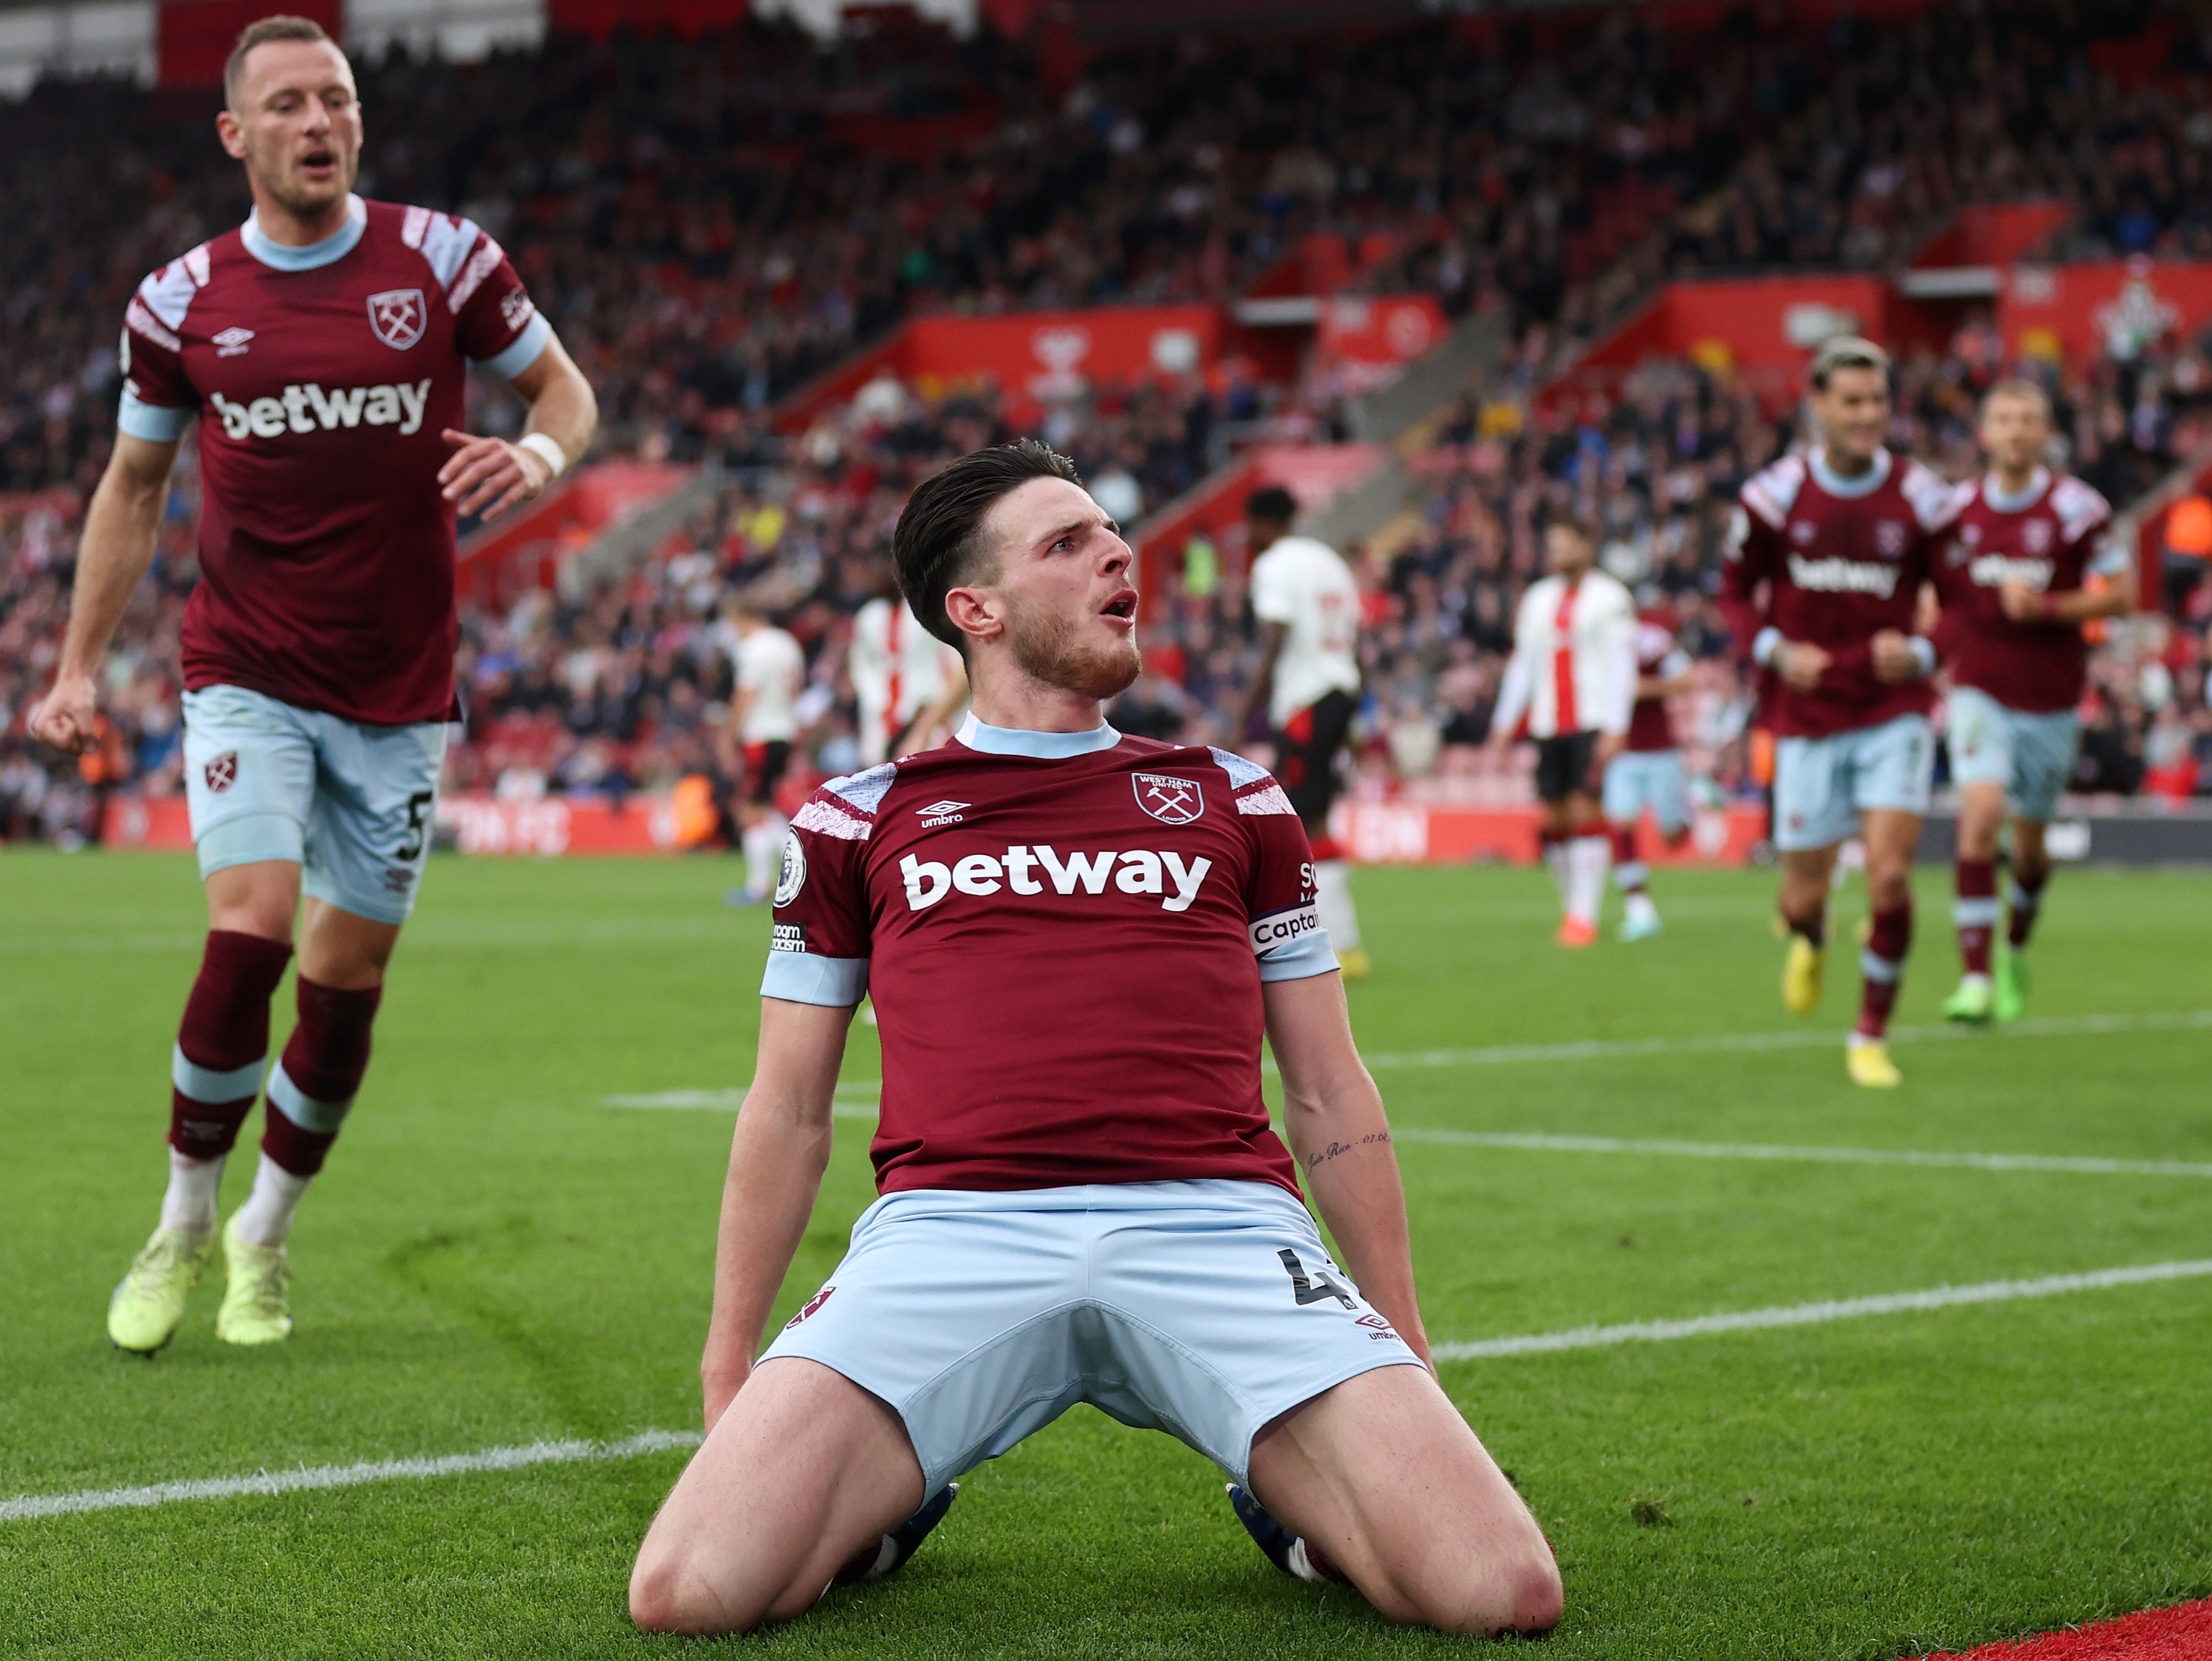 Declan Rice’s fine strike cancelled out Romain Perraud’s deflected goal